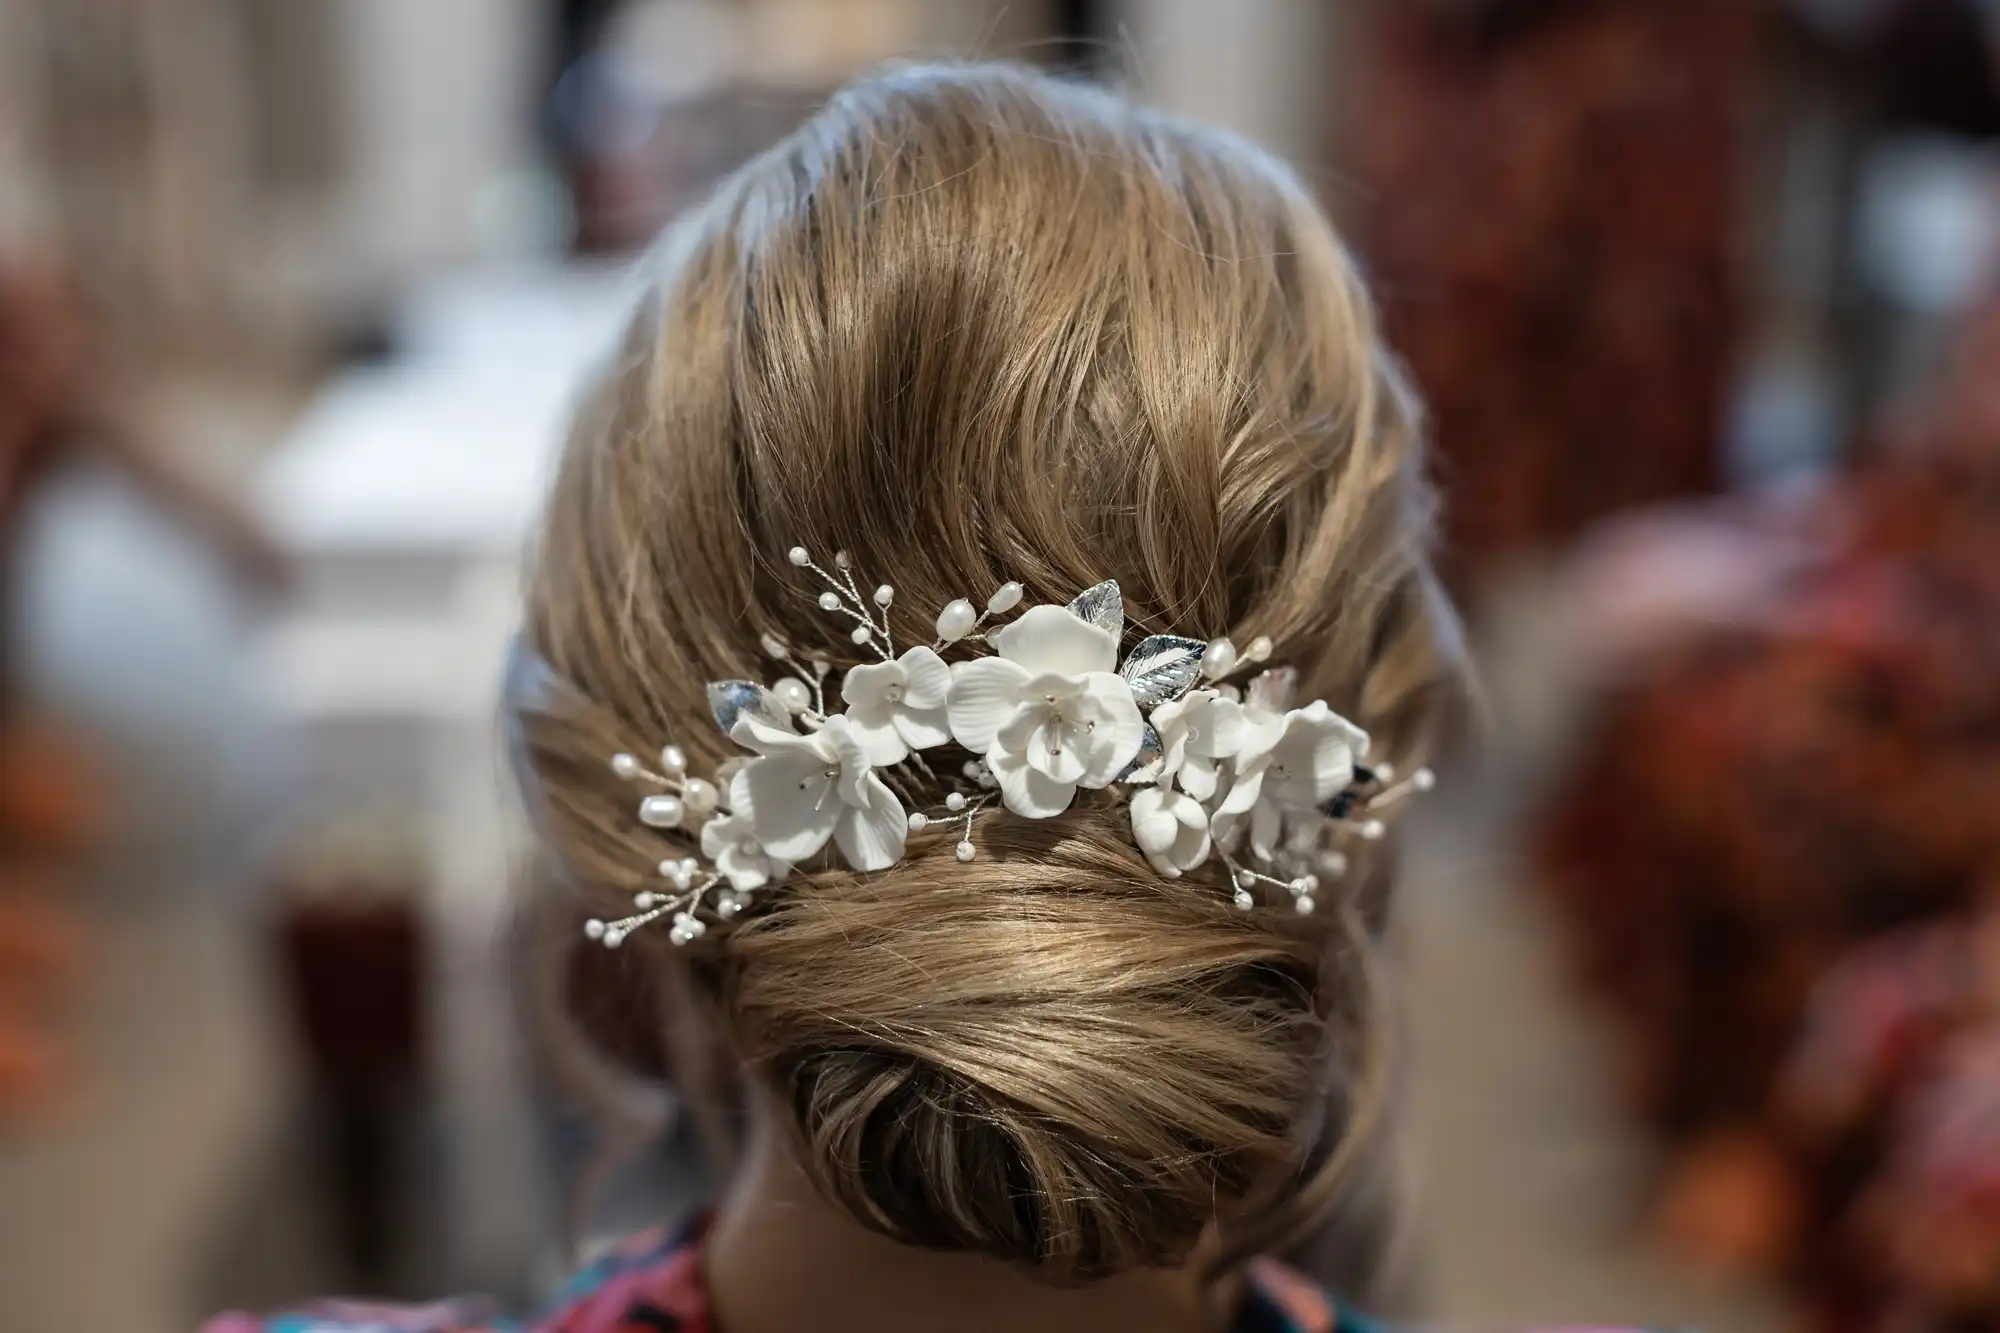 Rear view of a woman's hairstyle featuring an elegant updo accented with white floral and silver hair accessories.